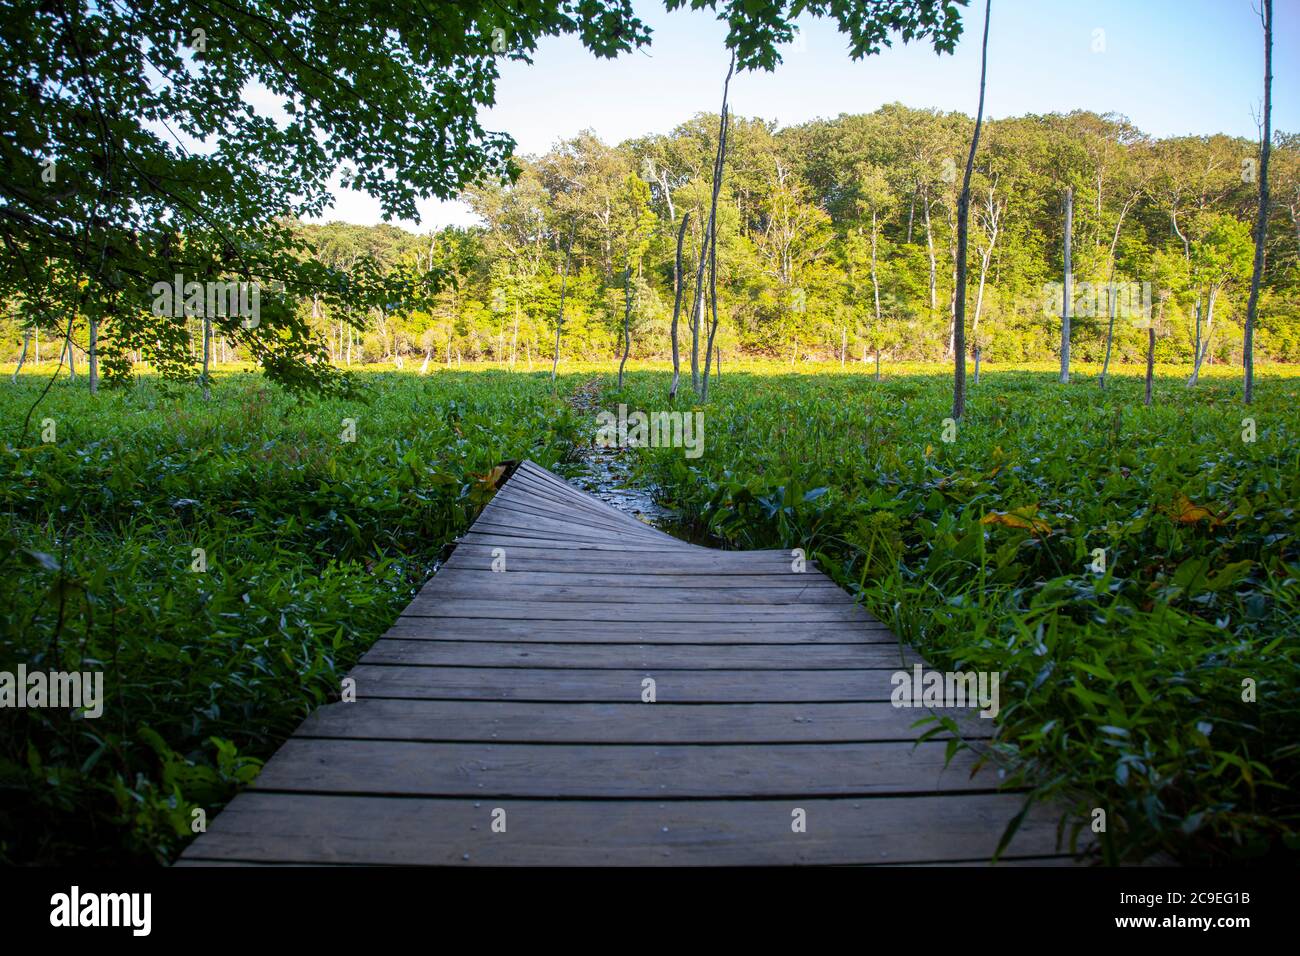 A landscape of a swamp ecosystem in Maryland. Image features a scenic swamp covered with water lilies and  Arrow Arum (Peltandra virginica) plants. Th Stock Photo